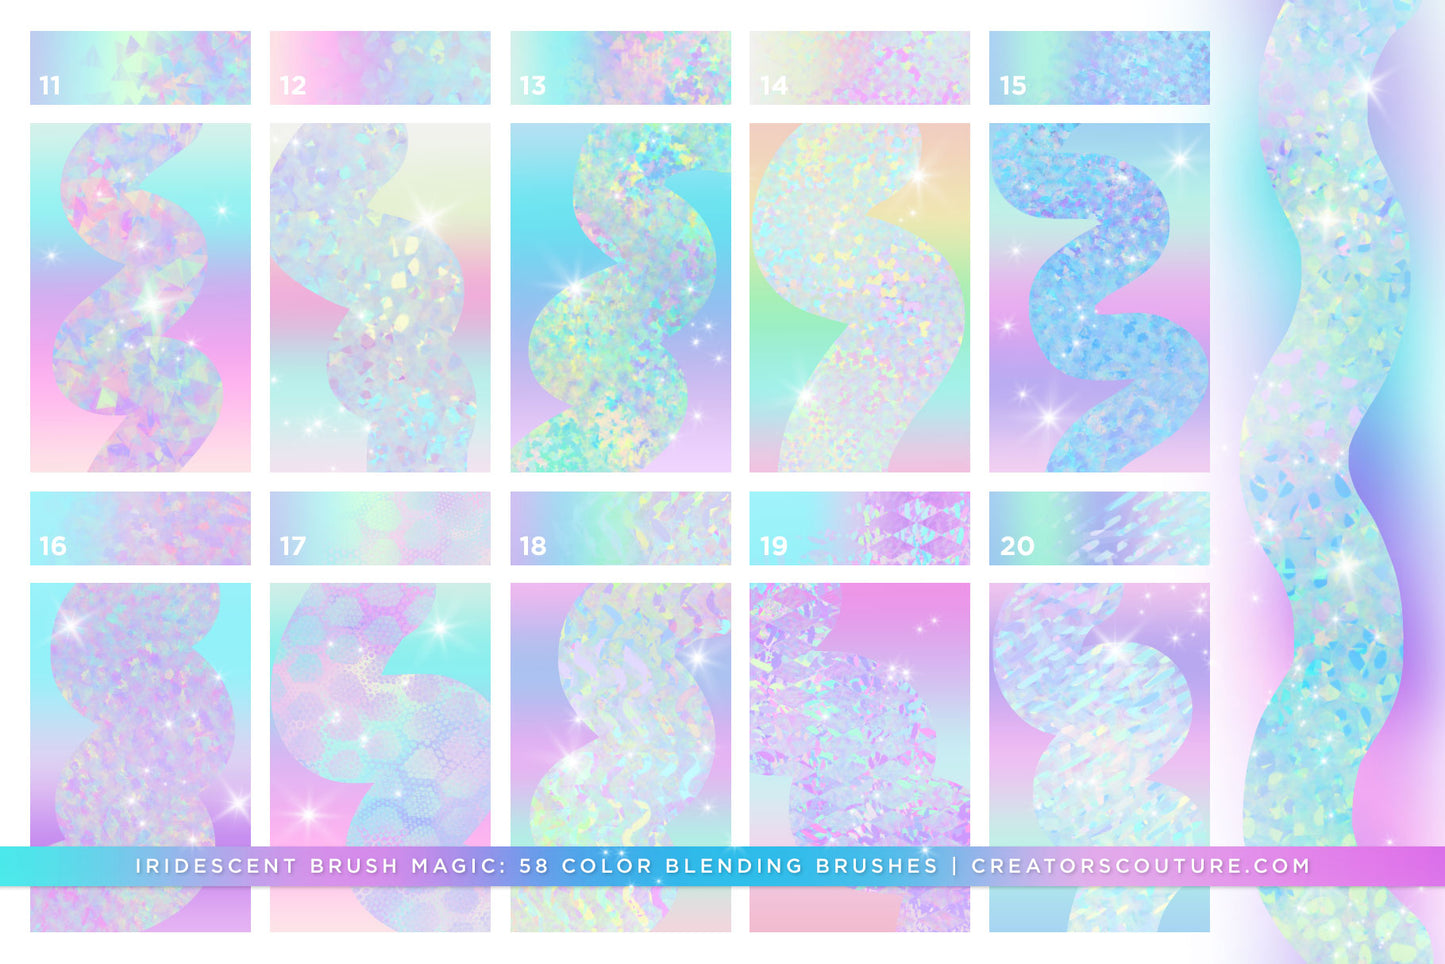 photoshop brushes for instant iridescent and holographic effects and brush strokes, brush preview chart 2